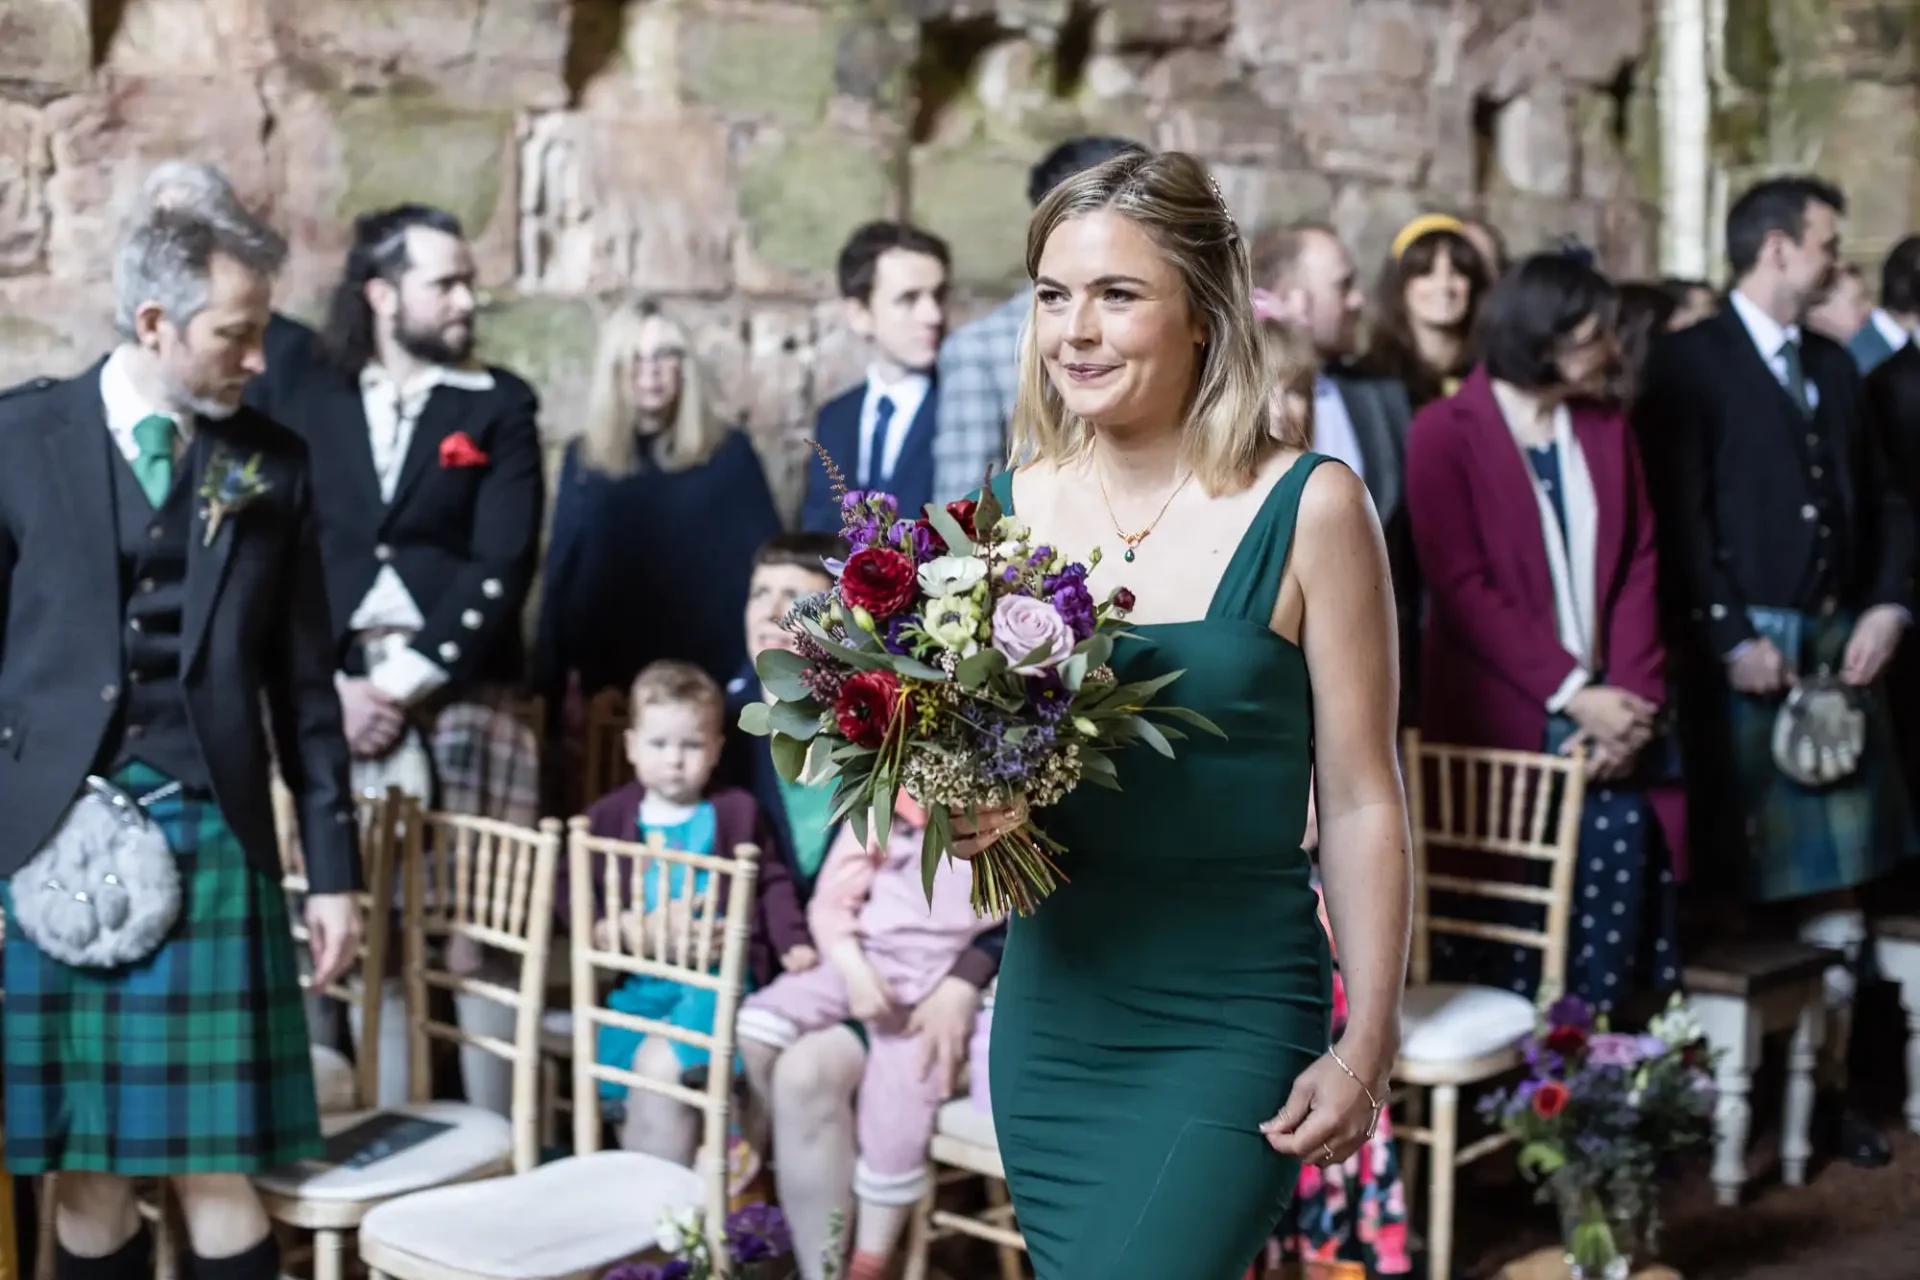 A woman in a green dress walks down an aisle, holding a bouquet of flowers. Guests, including men in kilts and children, are seated on both sides in a rustic setting with stone walls.